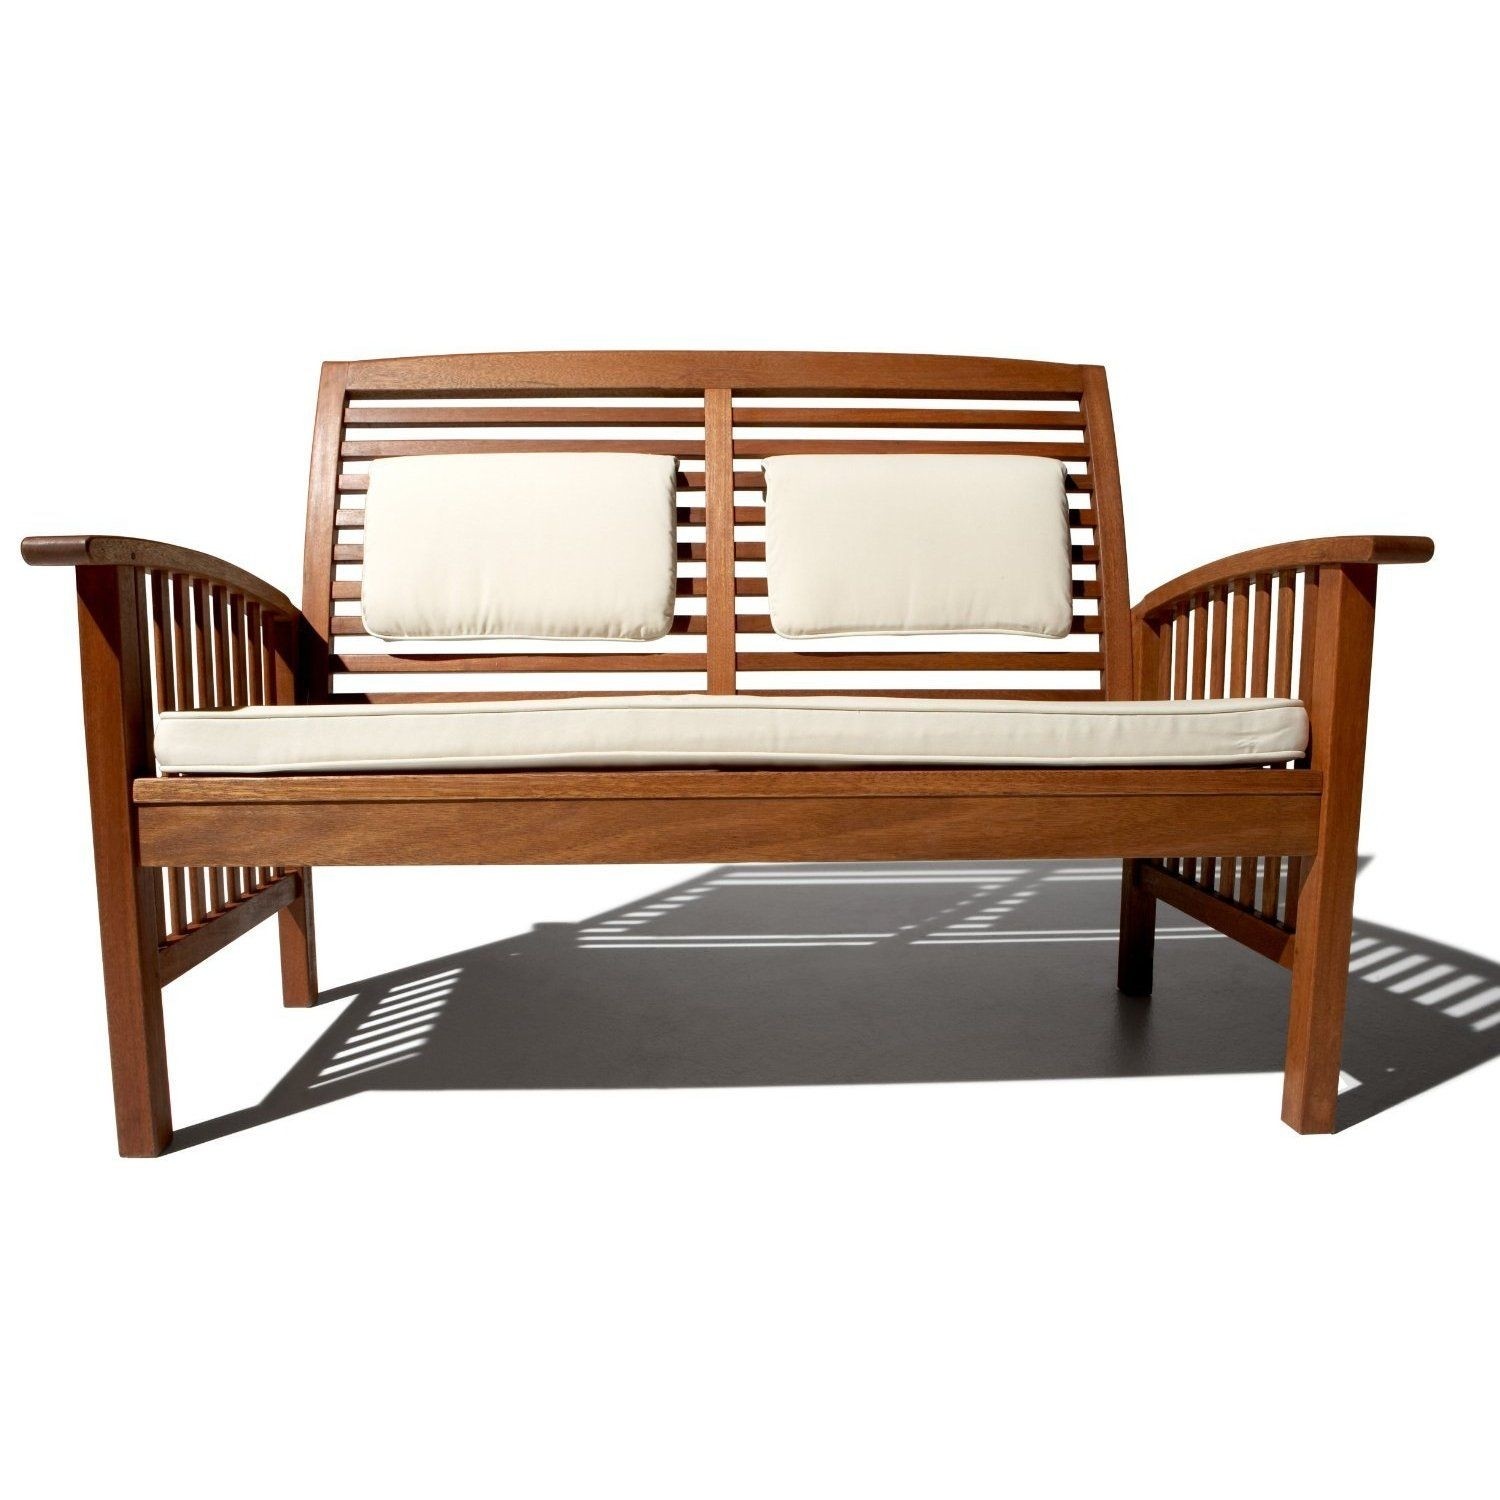 See larger image wood wooden indoor outdoor bench patio lawn